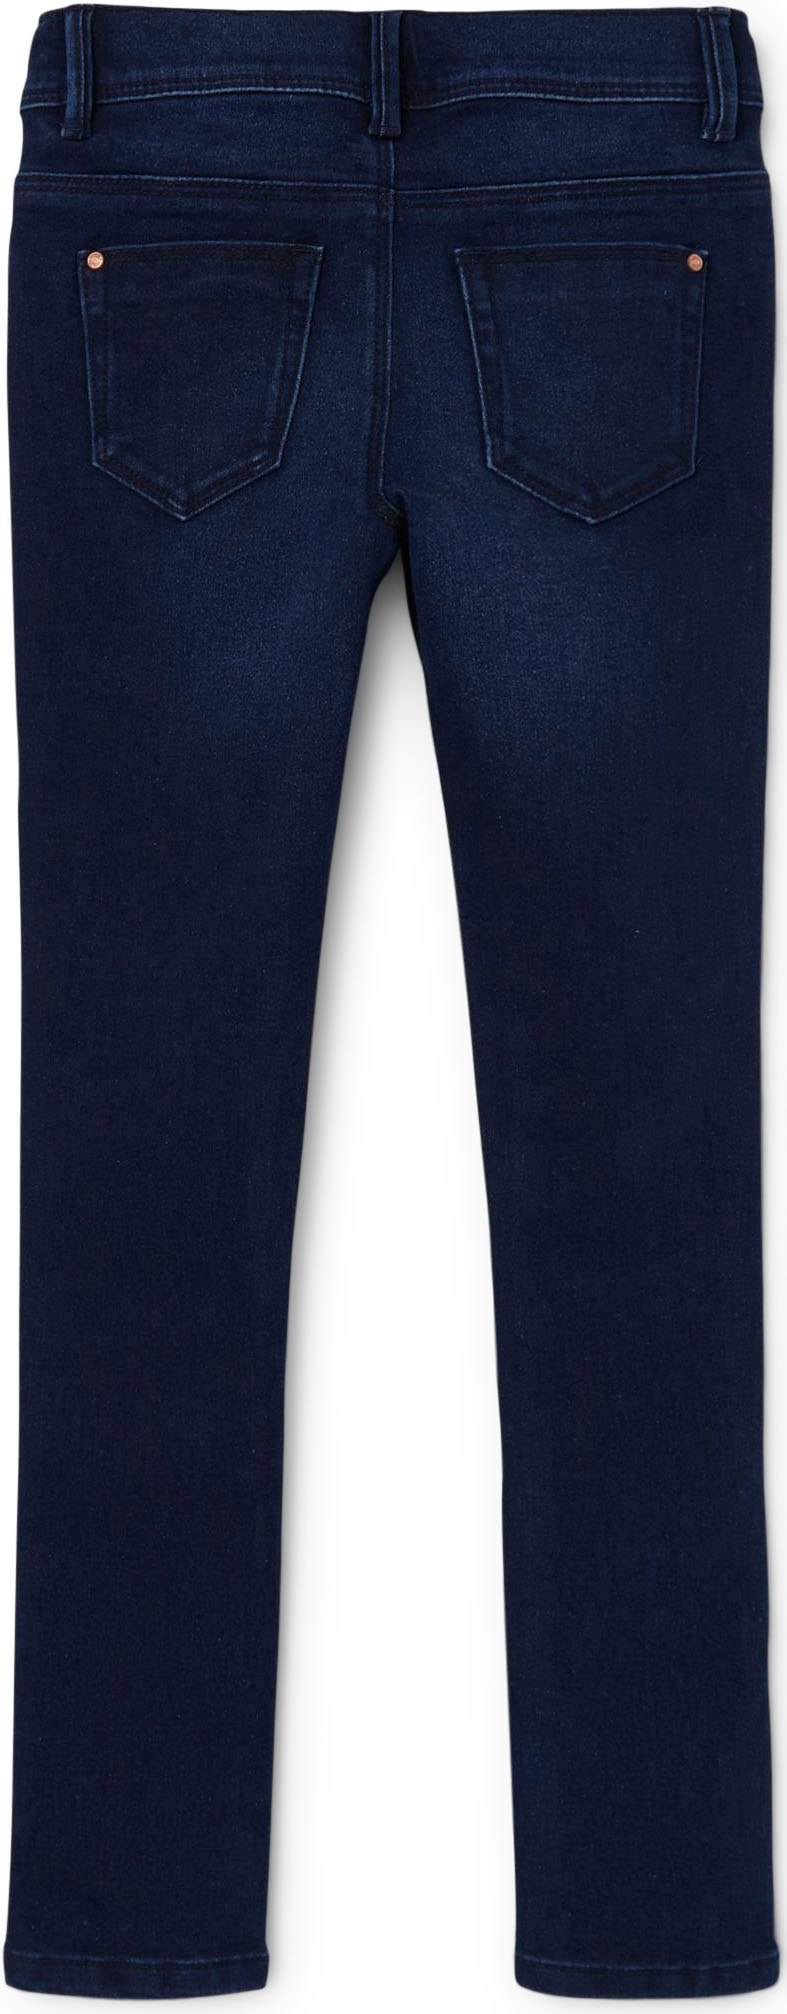 Stretch-Jeans Name »NKFPOLLY It PANT« bestellen DNMTAX